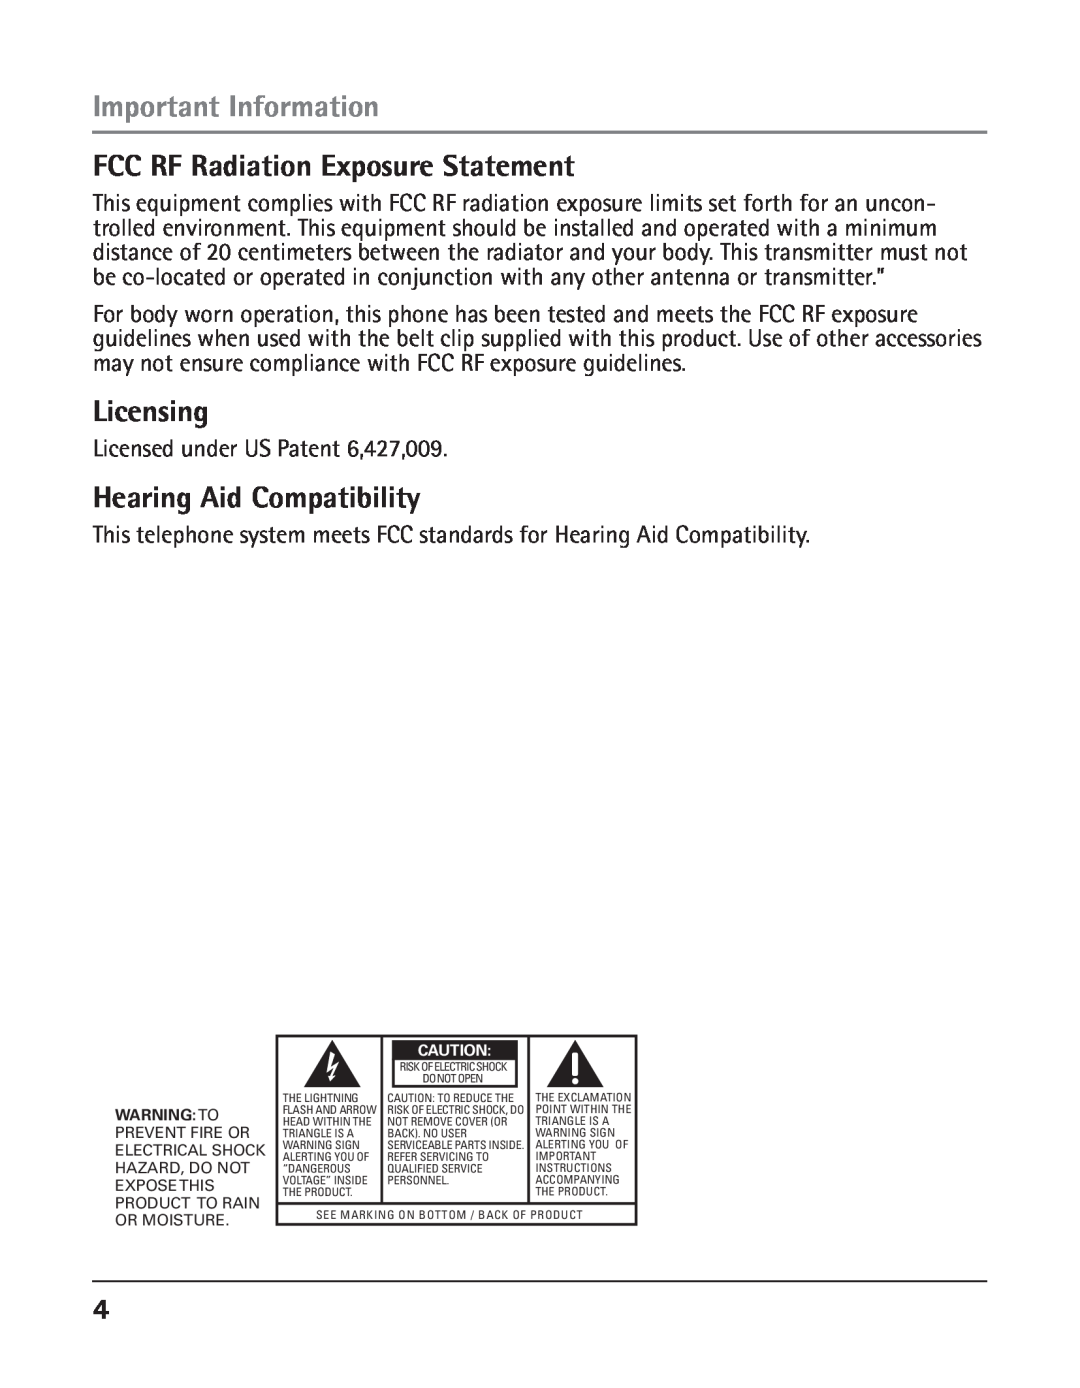 RCA 25425RE1A manual FCC RF Radiation Exposure Statement, Licensing, Hearing Aid Compatibility, Important Information 